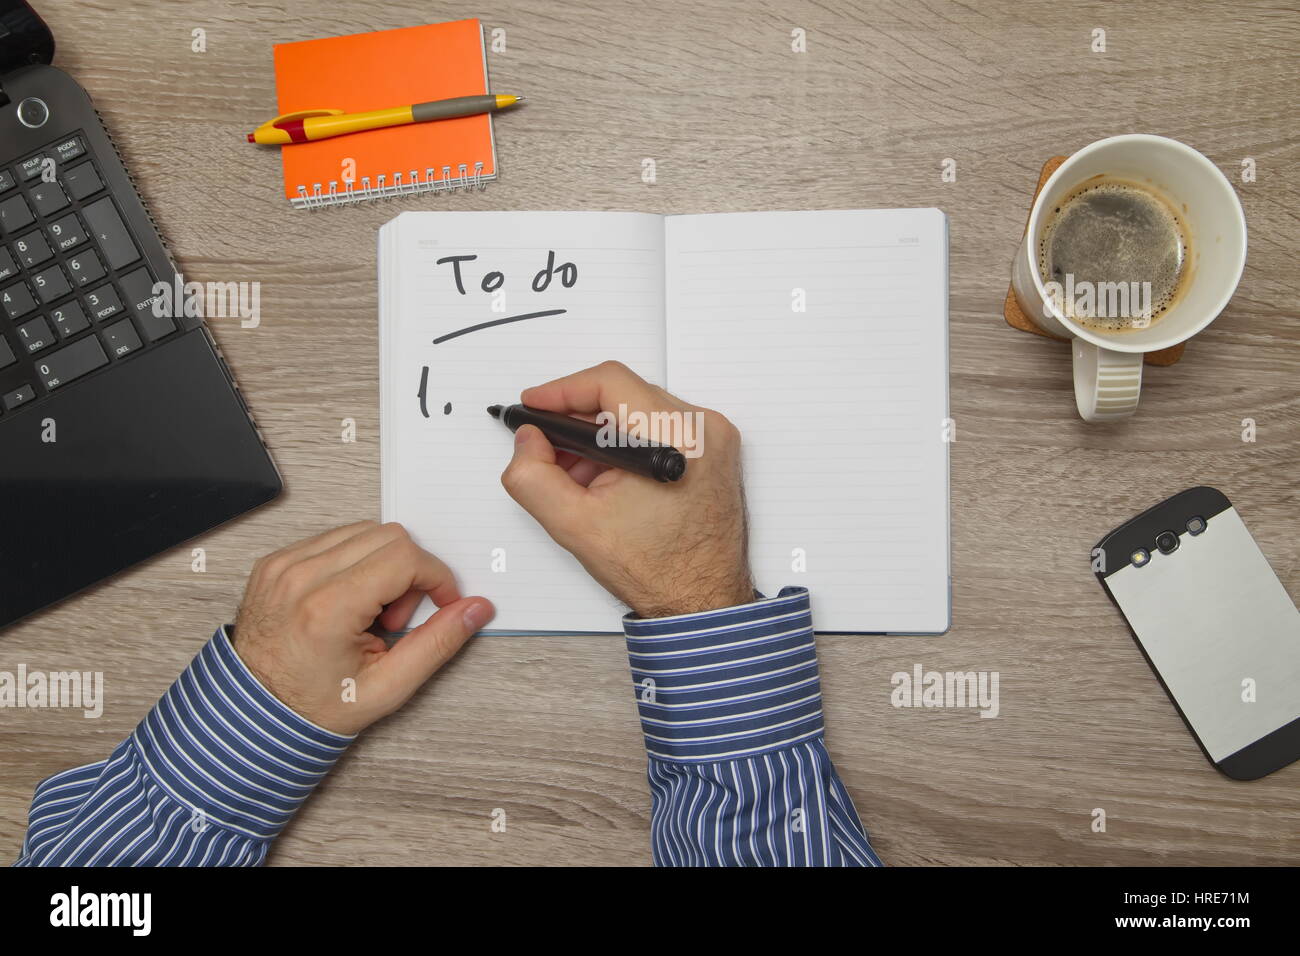 Male hand writing text ' to do' in notebook while as he drinks coffee Stock Photo